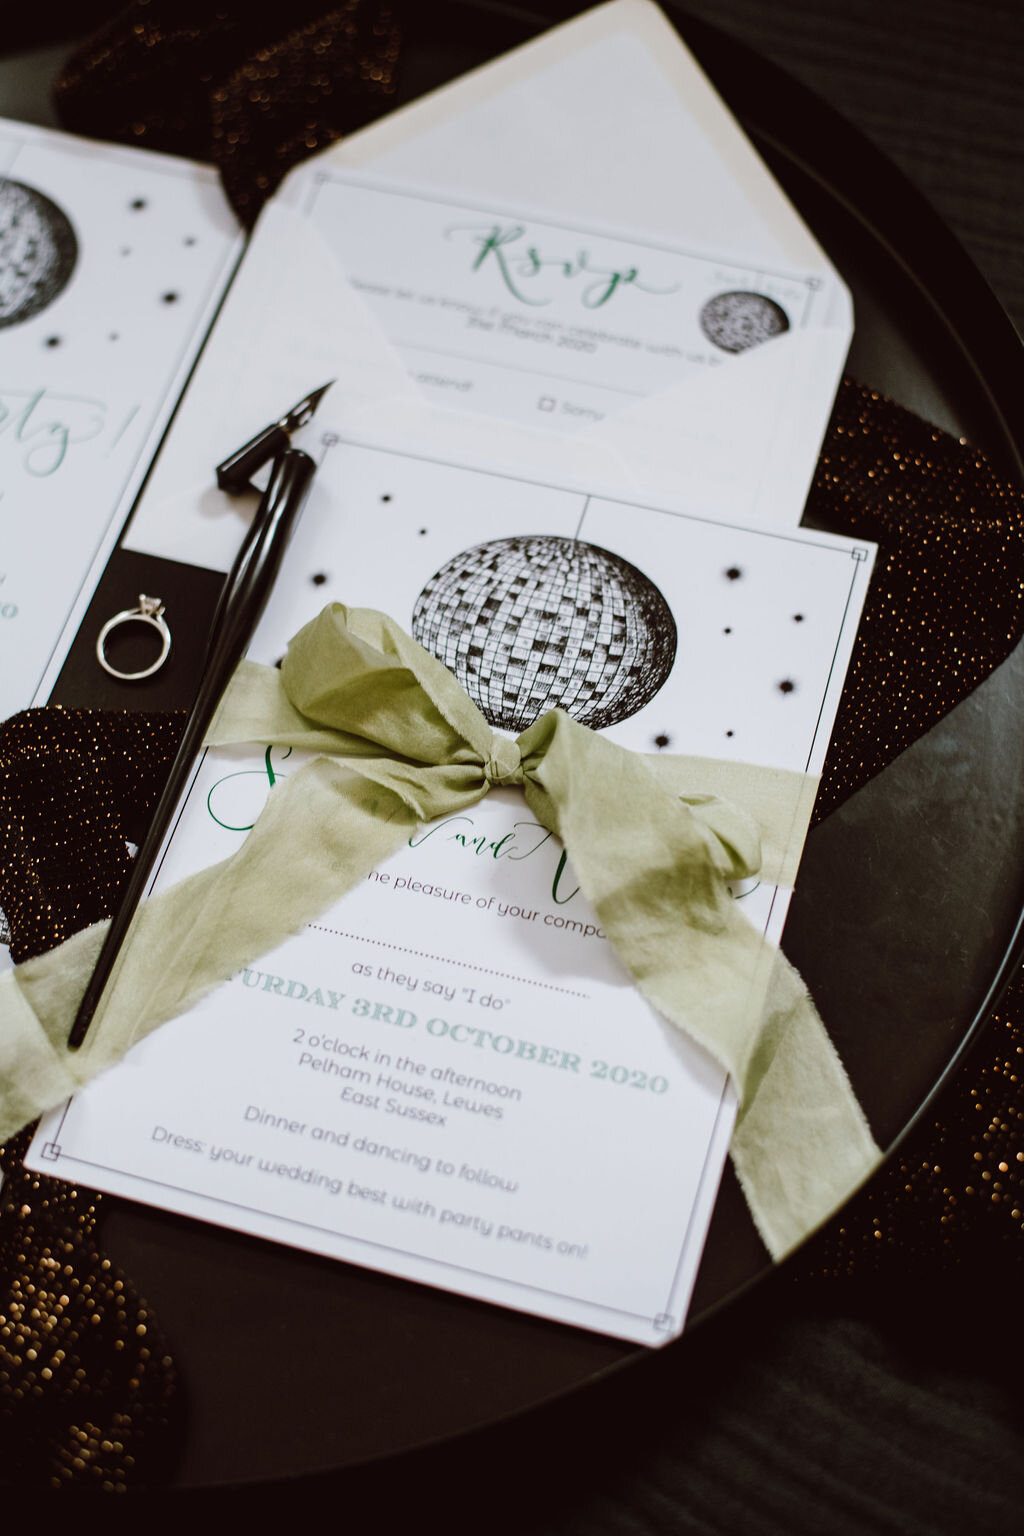 Disco ball invites - eco friendly invitations made from recycled paper - Pelham House wedding stationery.jpg